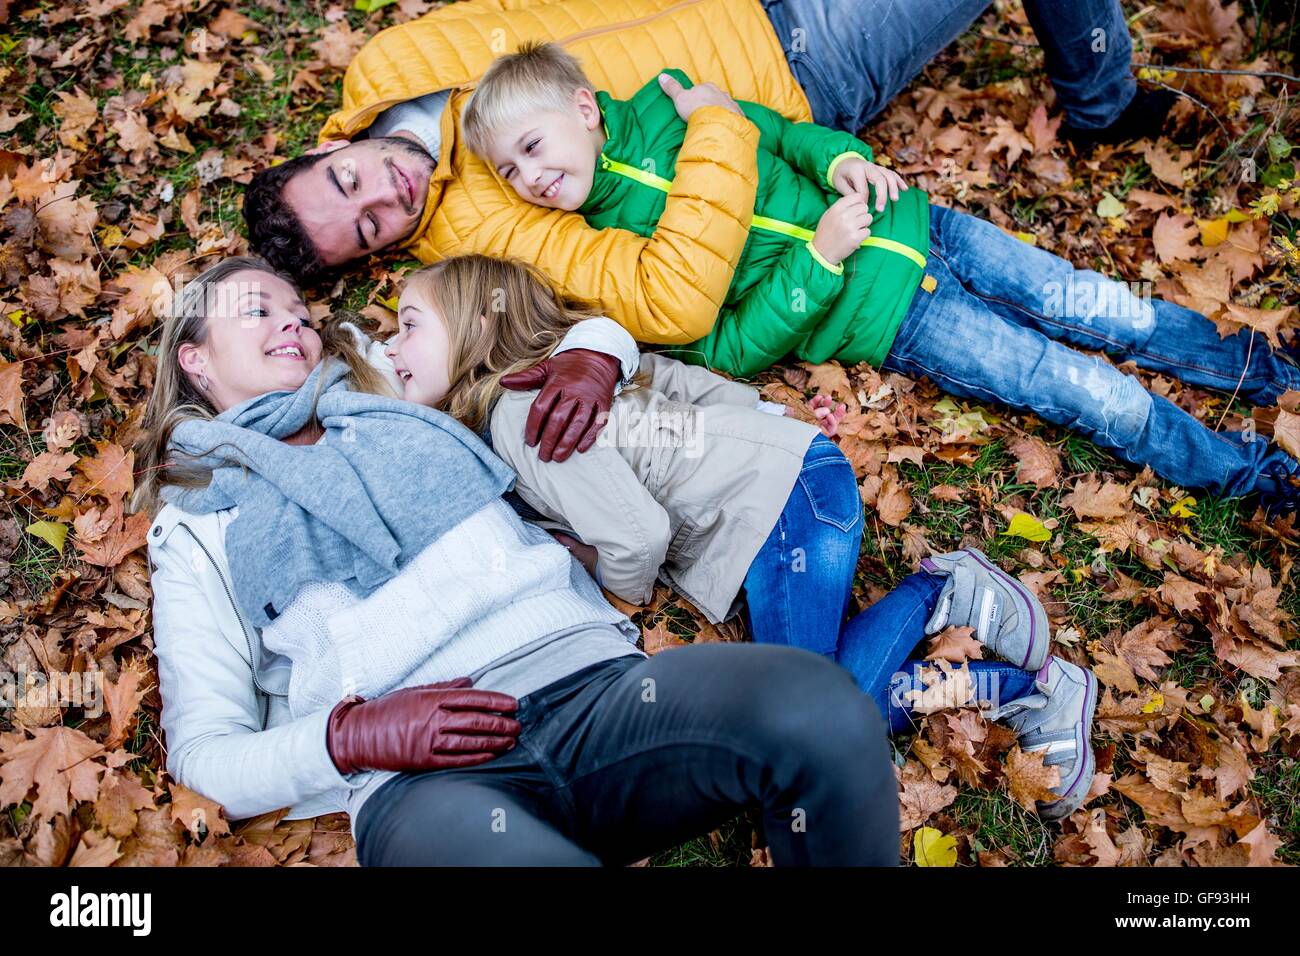 MODEL RELEASED. Family lying on dried leaves in autumn and talking. Stock Photo